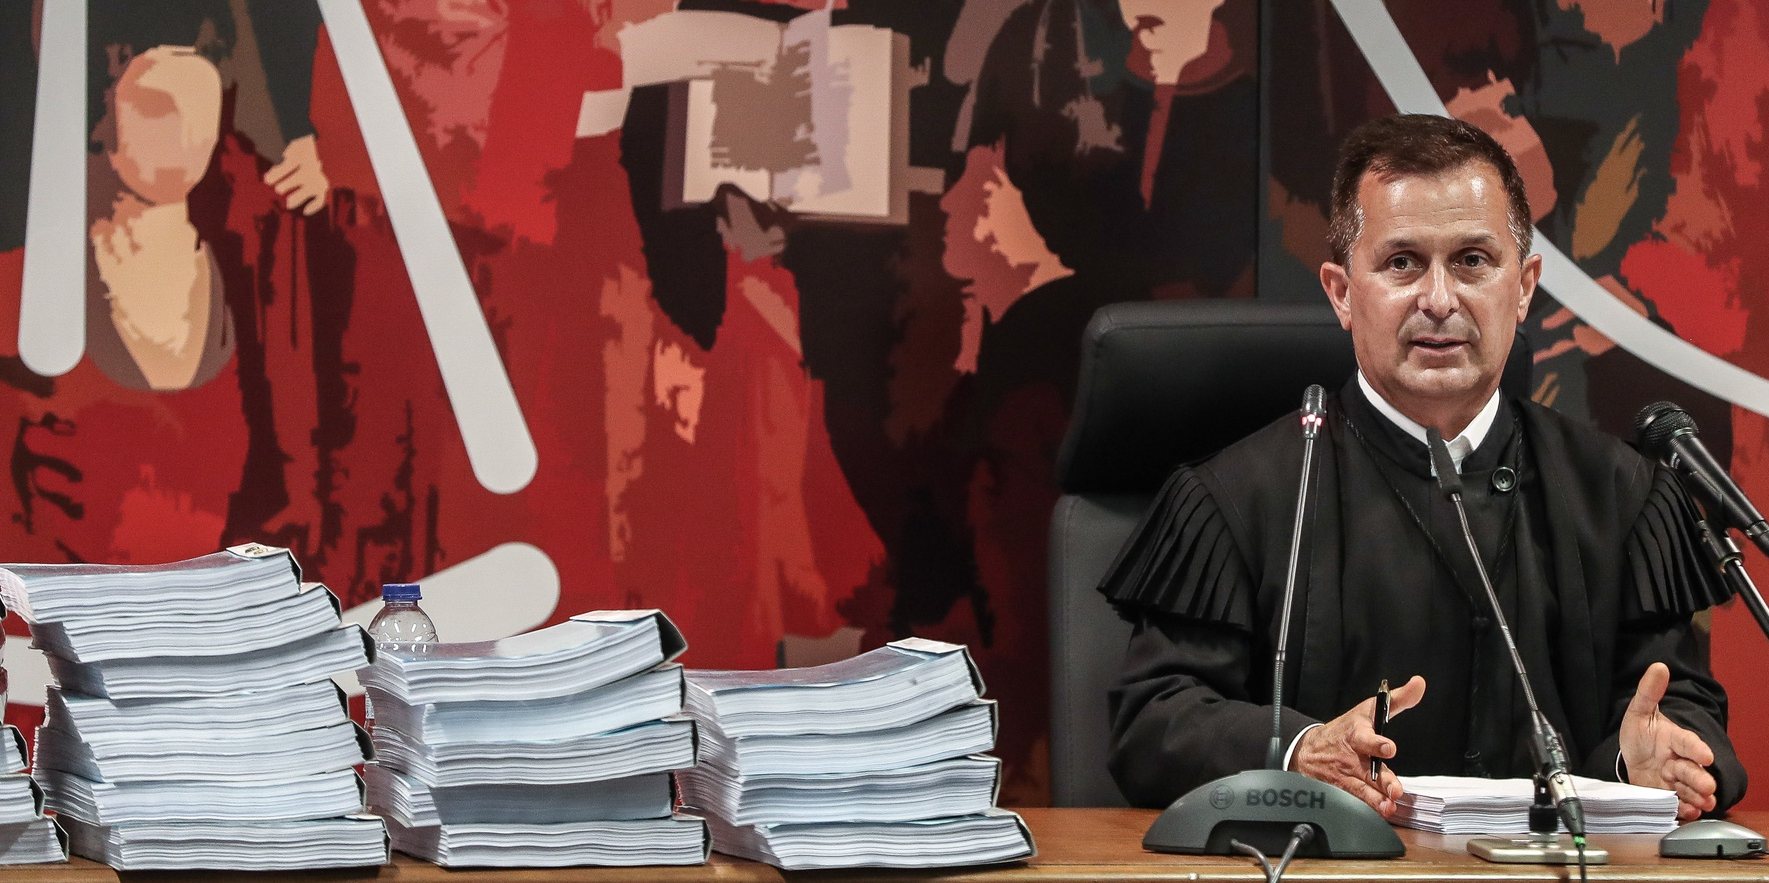 The juge Ivo Rosa reads the instructional decision of the high-profile corruption case known as Operation Marques, at the Justice Campus in Lisbon, Portugal, 09 April 2021. Operation Marques has 28 defendants - 19 people and 9 companies - including former Prime Minister Jose Socrates, banker Ricardo Salgado, businessman and friend of Socrates Carlos Santos Silva, and senior executives of Portugal Telecom, and is related to crimes of active and passive corruption, money laundering, document forgery, and tax fraud.  MARIO CRUZ/POOL/LUSA